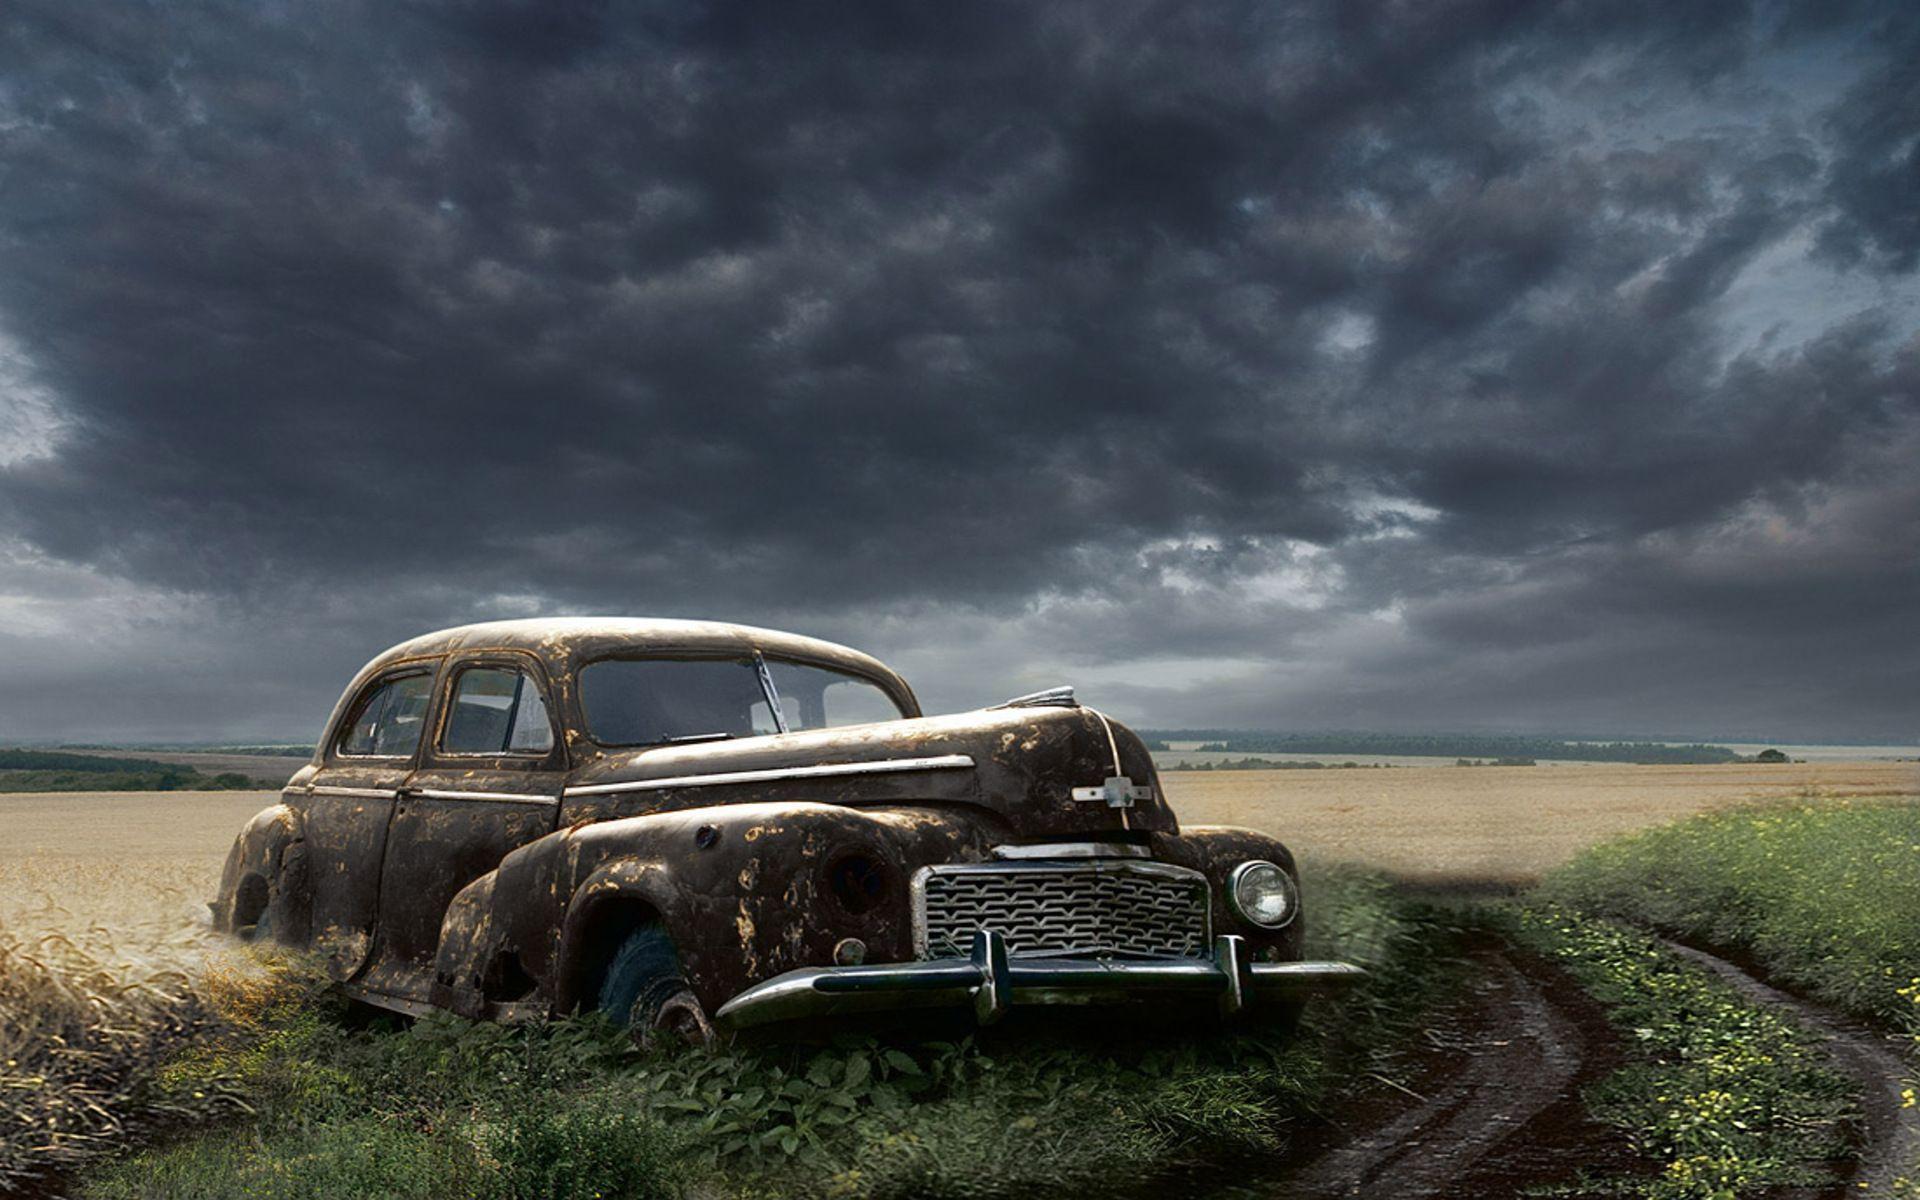 Rustic Old Cars Wallpaper Free Rustic Old Cars Background